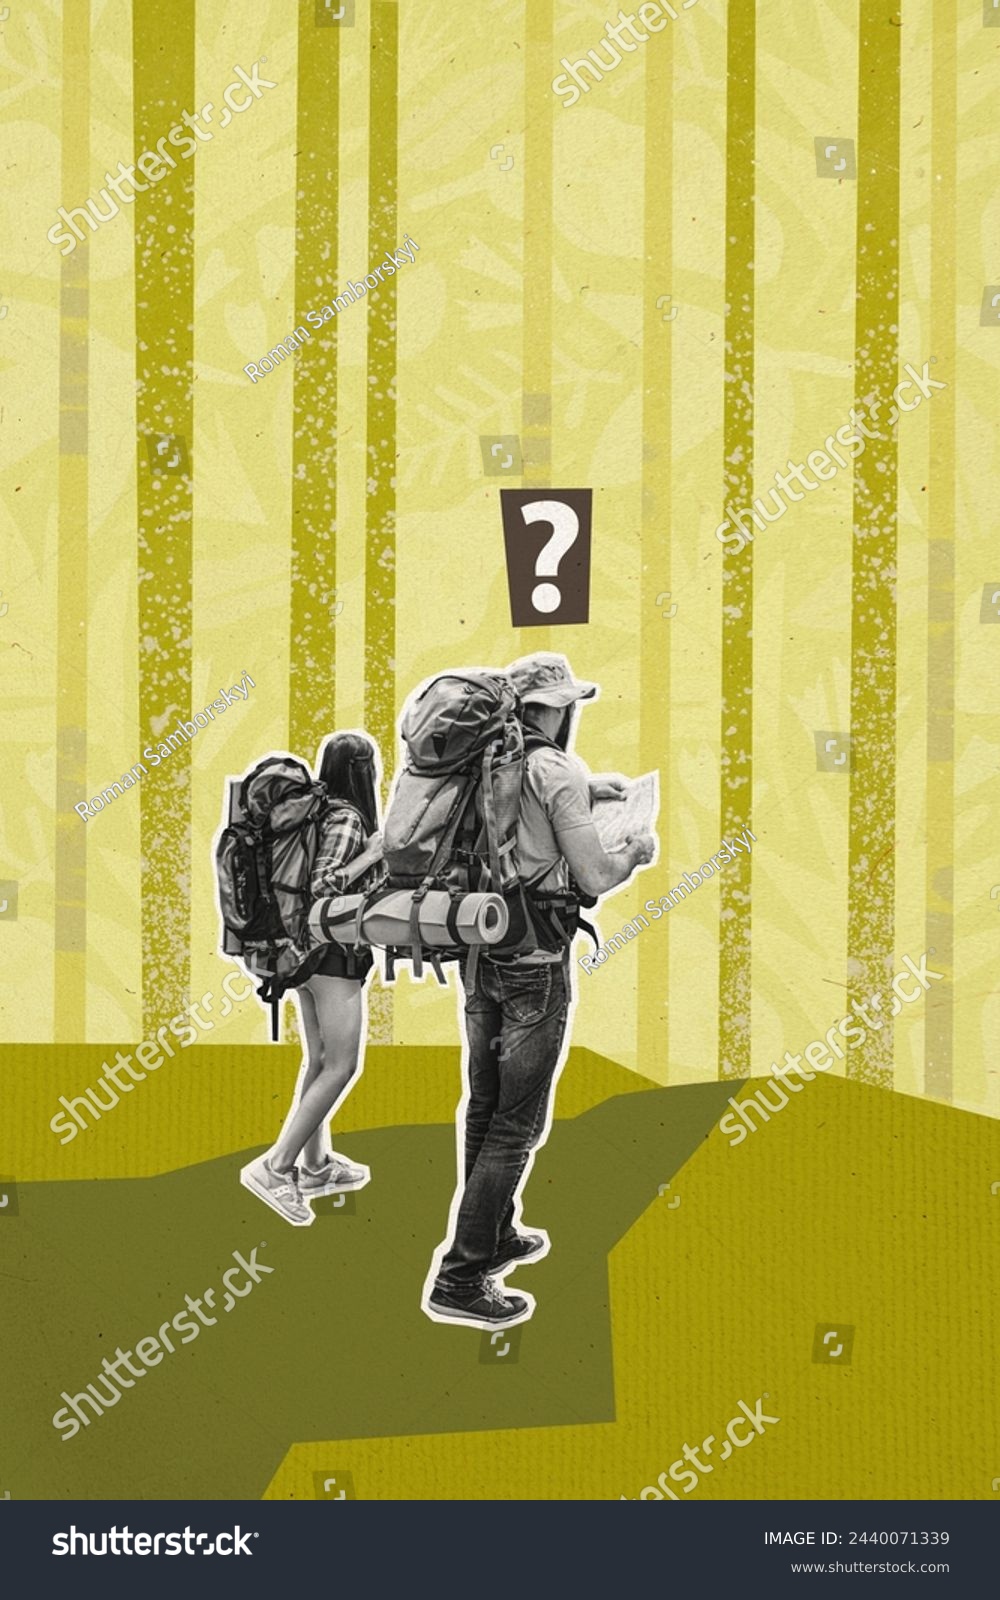 Vertical creative collage poster two expediters lost route way question mark problem find path forest wood nature camping #2440071339